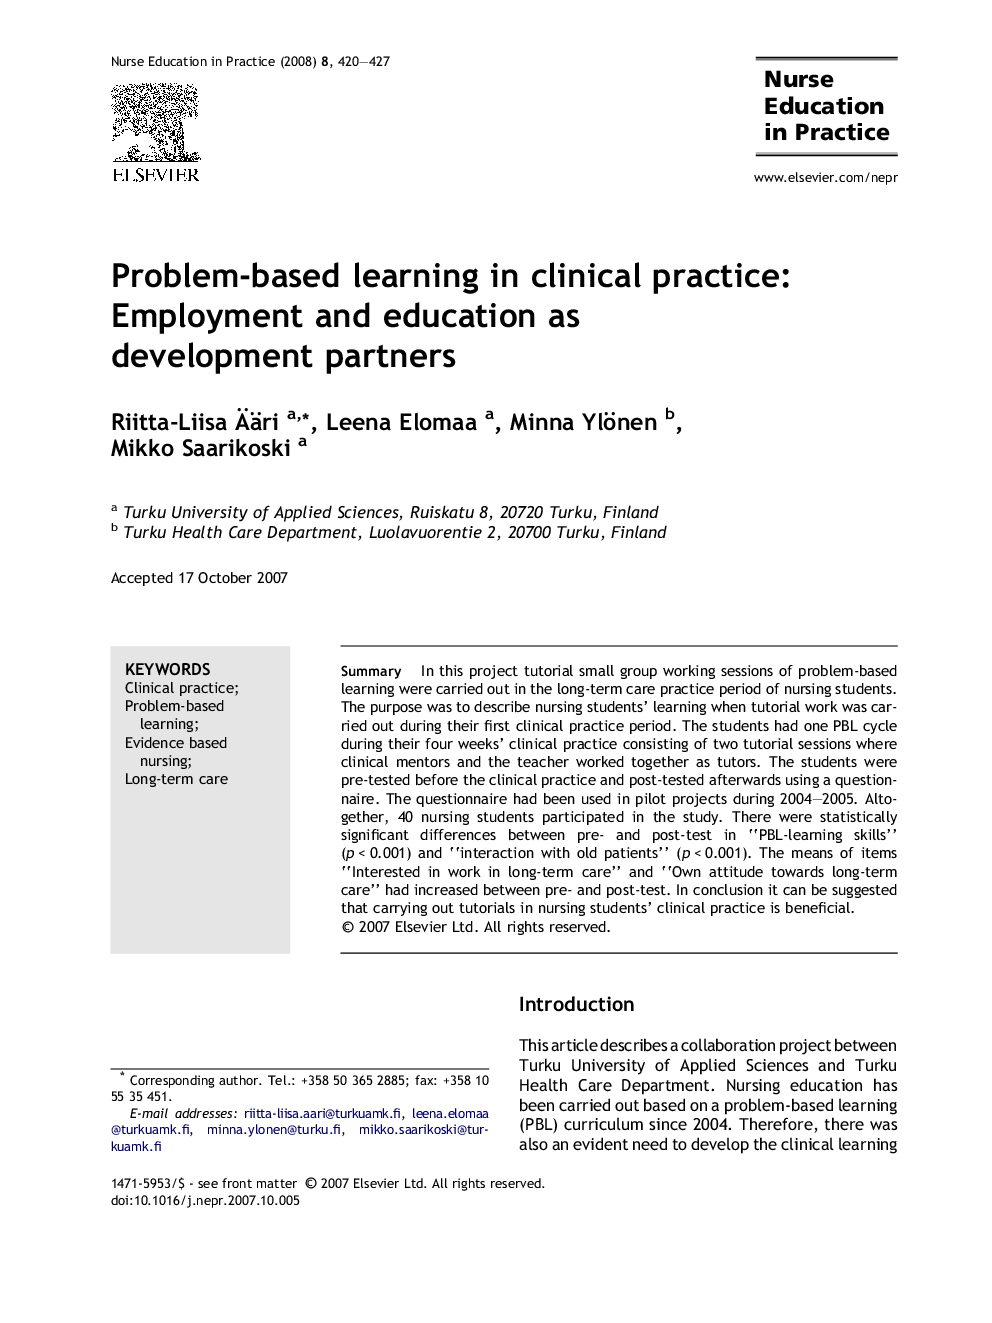 Problem-based learning in clinical practice: Employment and education as development partners